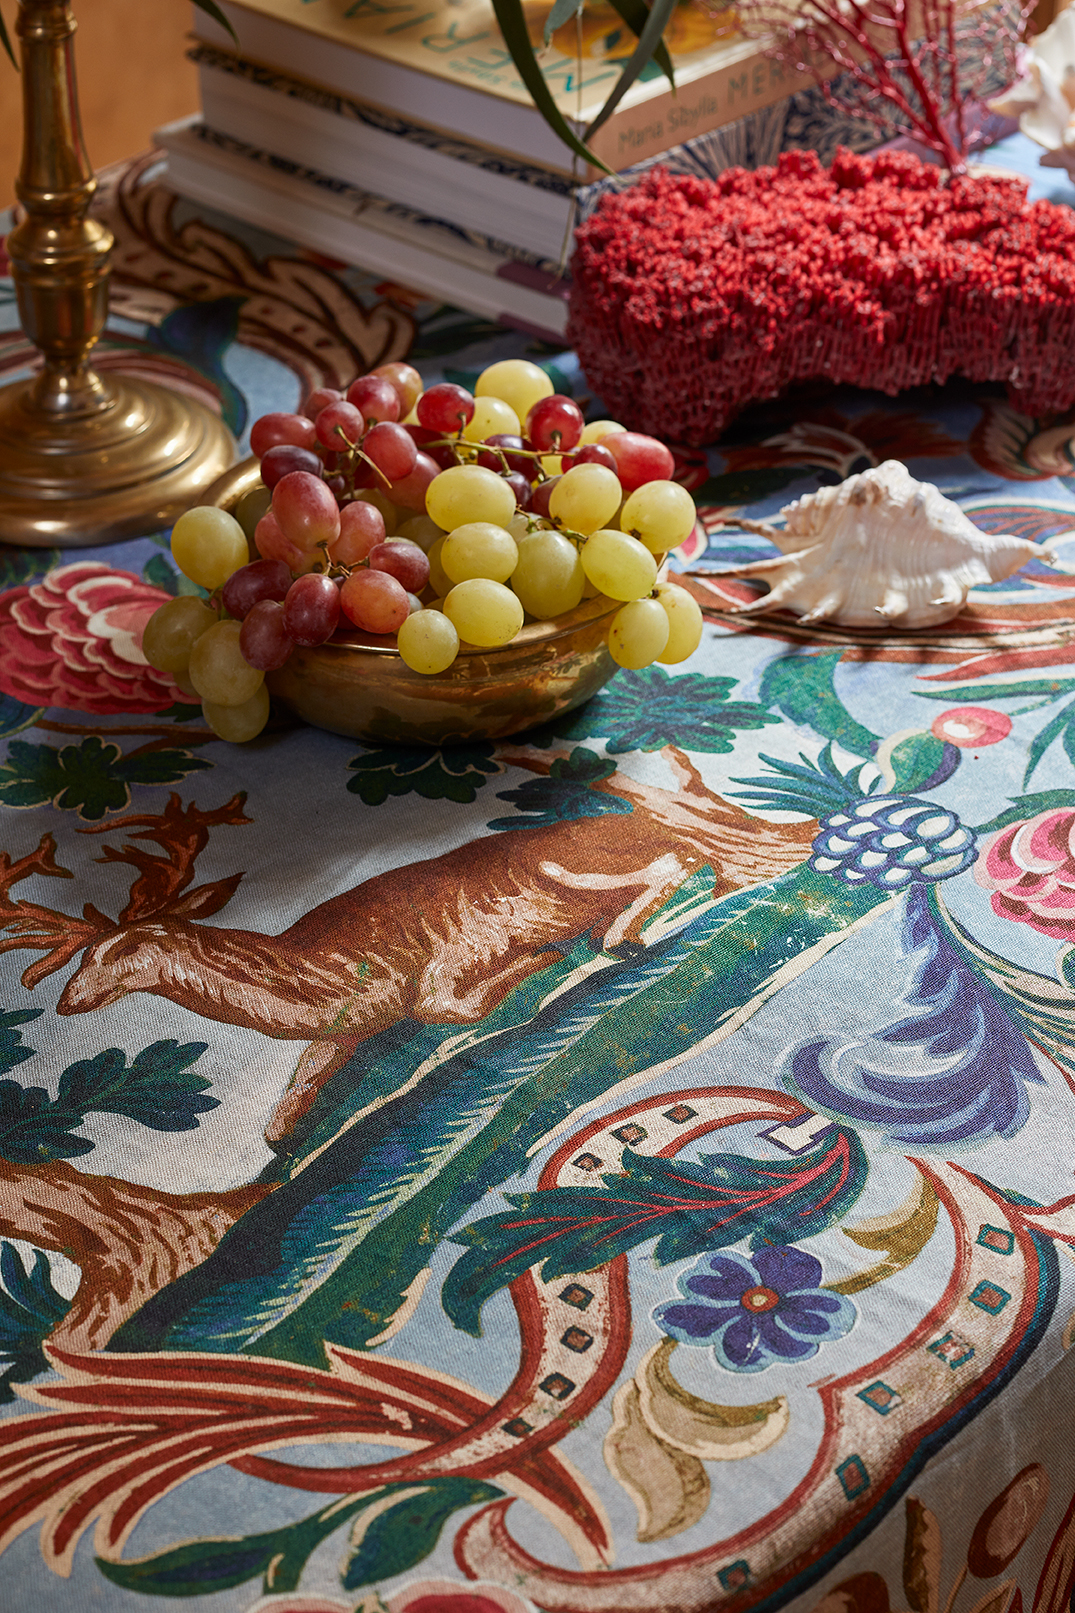 Melian-Raldolph's collection for Güell-LaMadrid is called Bloomsbury and includes linens, linen sheers, velvets, jacquards, cottons in four colorways that range from blues and greens to terracotta and ochres.